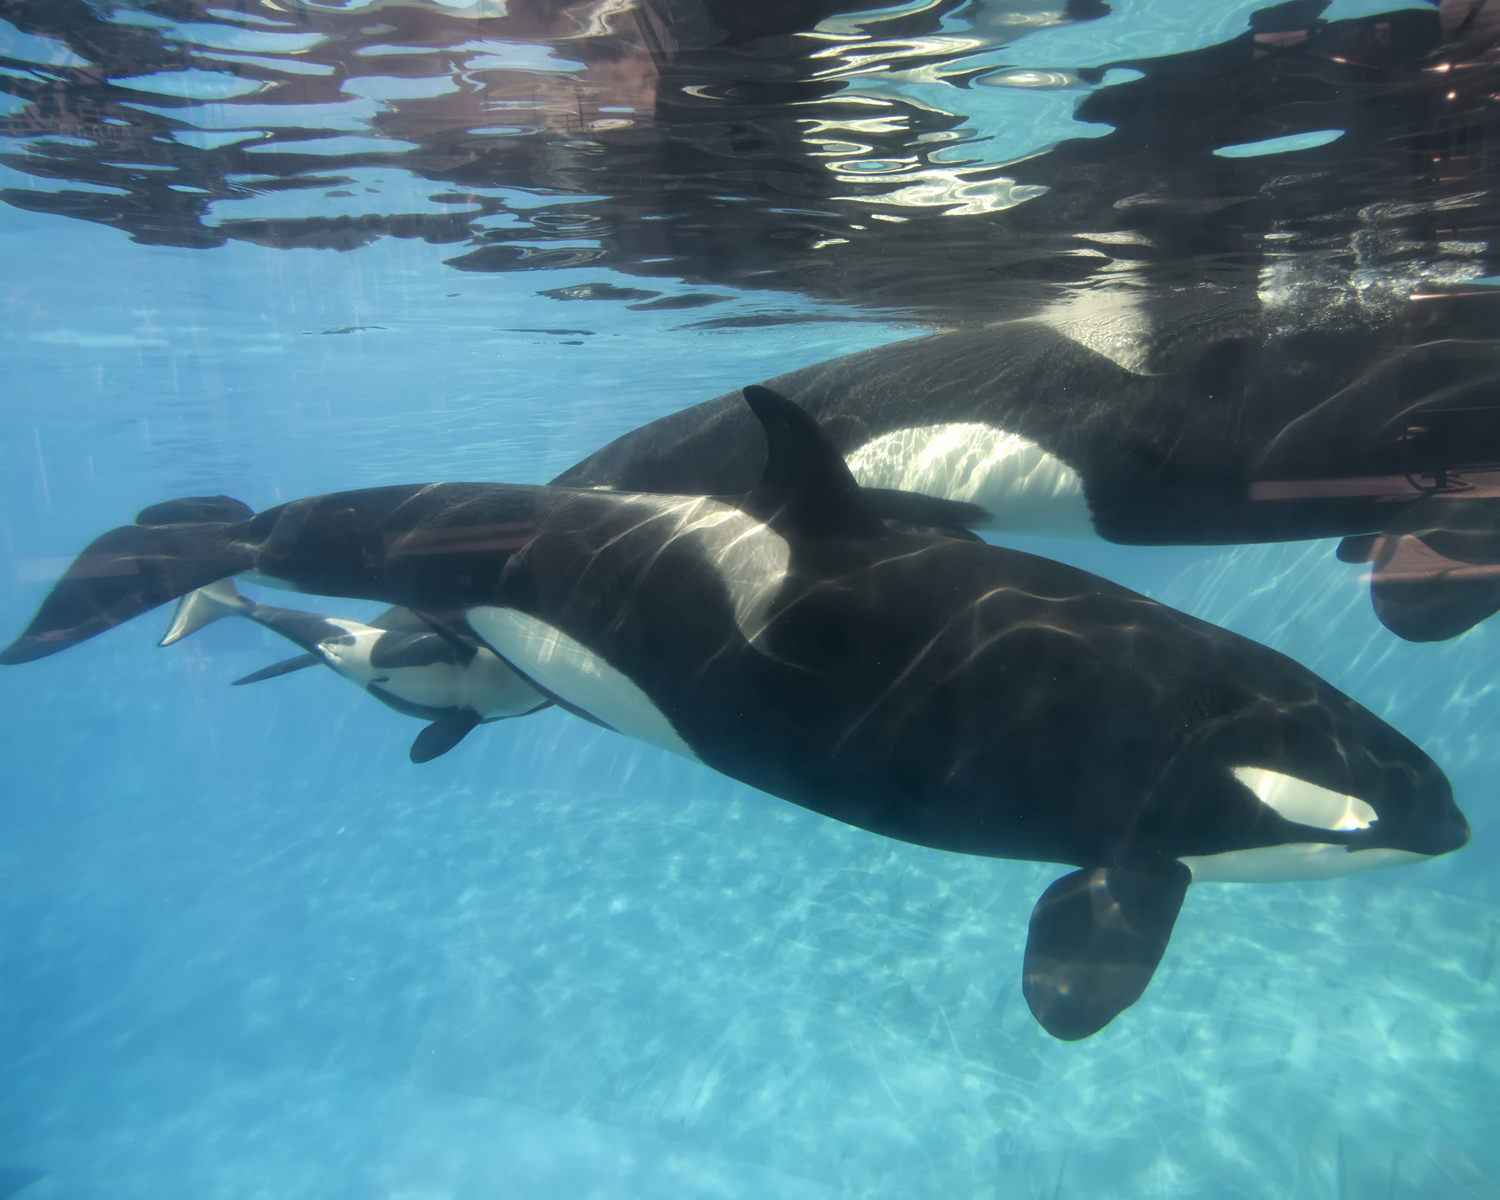 A baby killer whale calf nurses from its mother at SeaWorld San Diego's Shamu Stadium on Dec. 4, 2014 in San Diego (Getty Images)